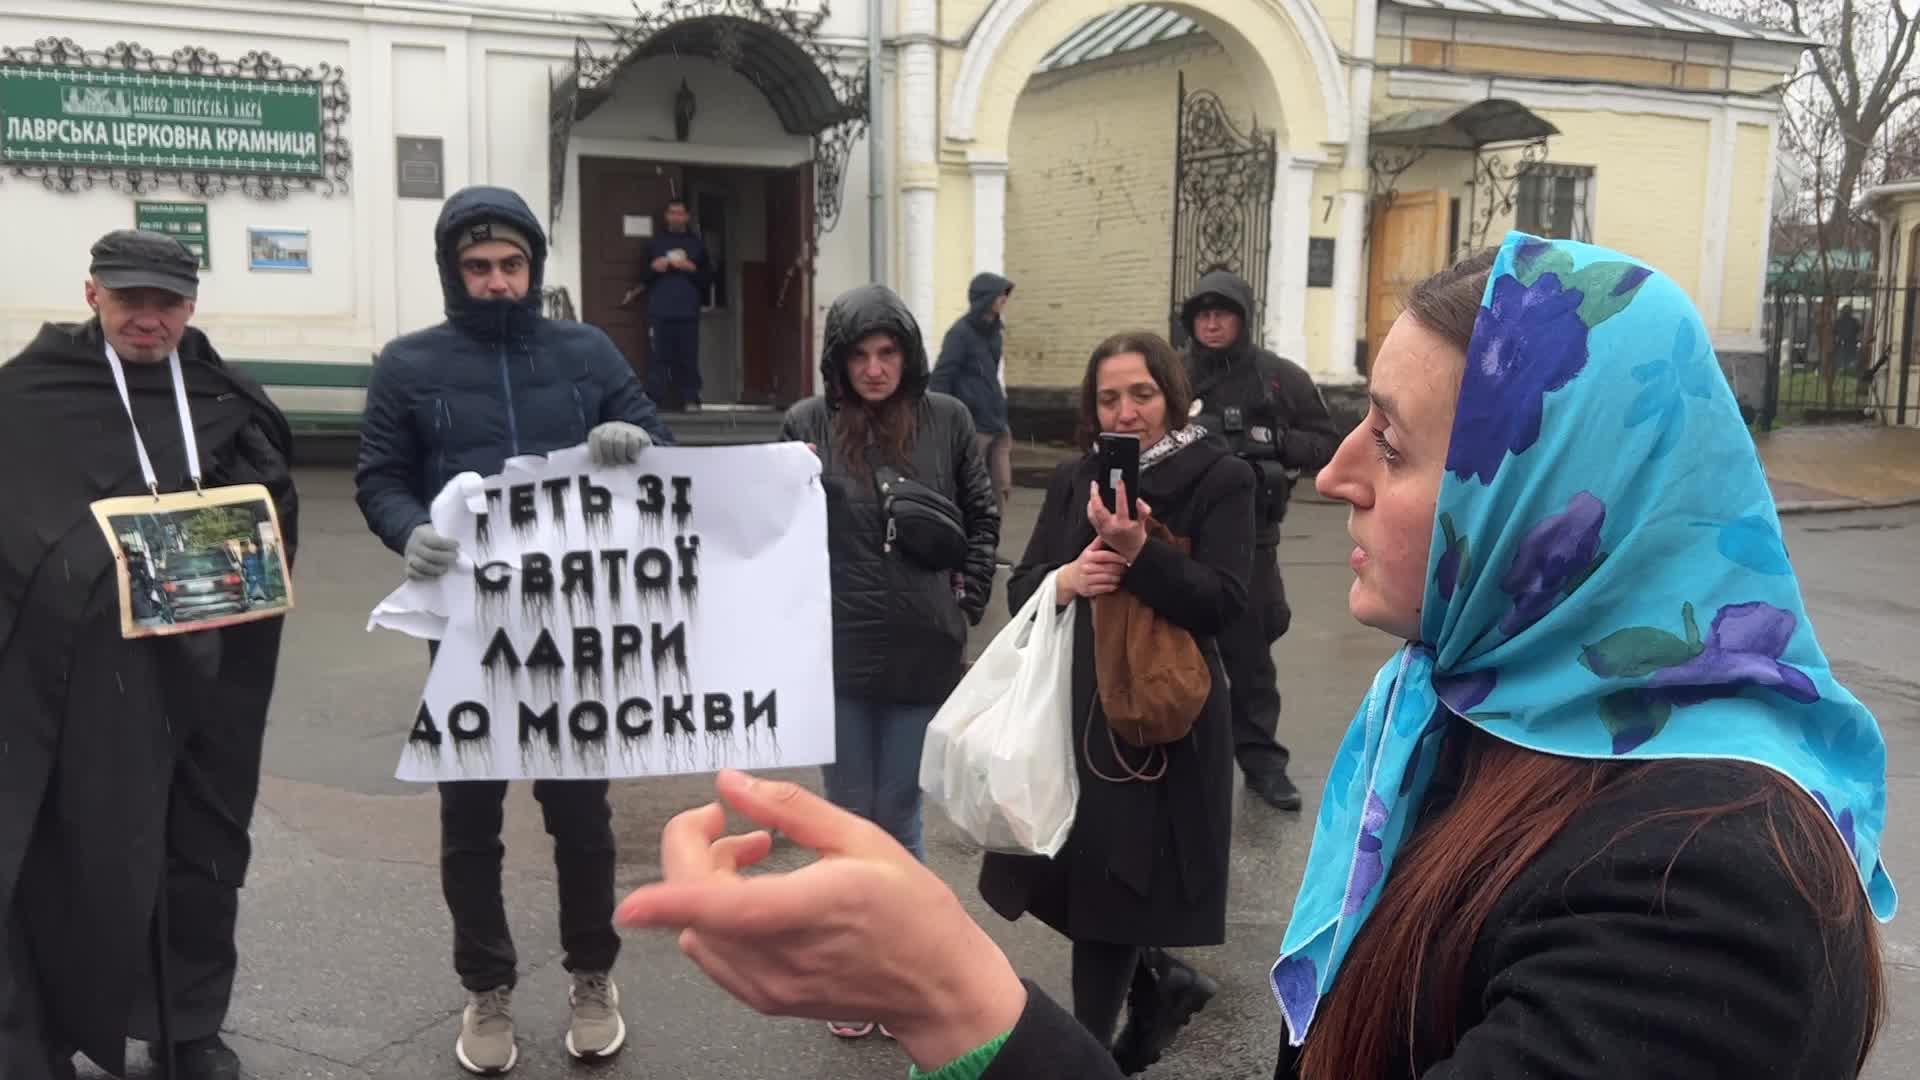 Rally at the entrance to the Kyiv-Pechersk Lavra in Kyiv